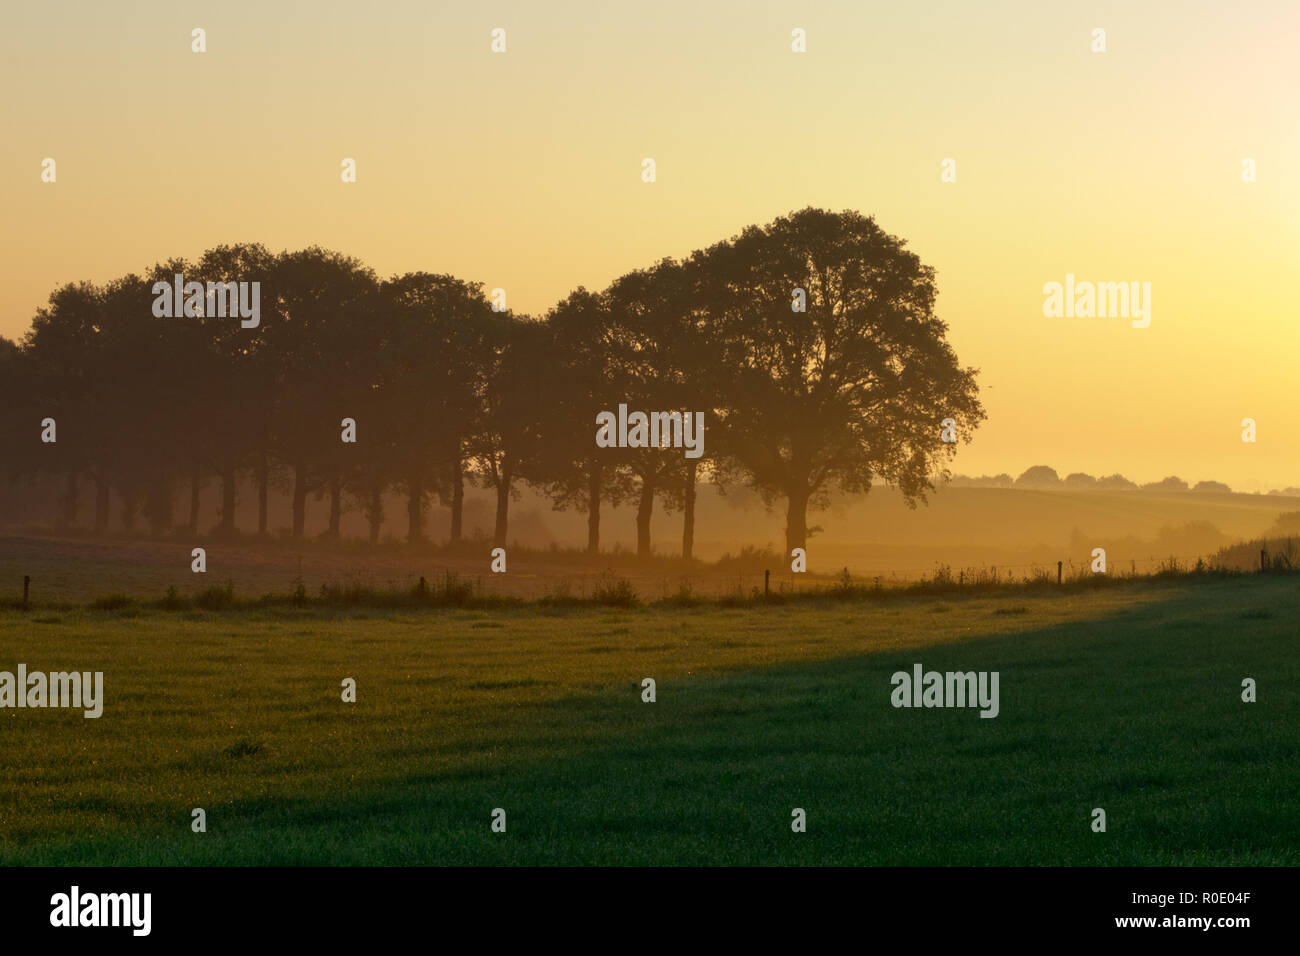 Row of trees during misty sunrise in agricultural landscape Stock Photo